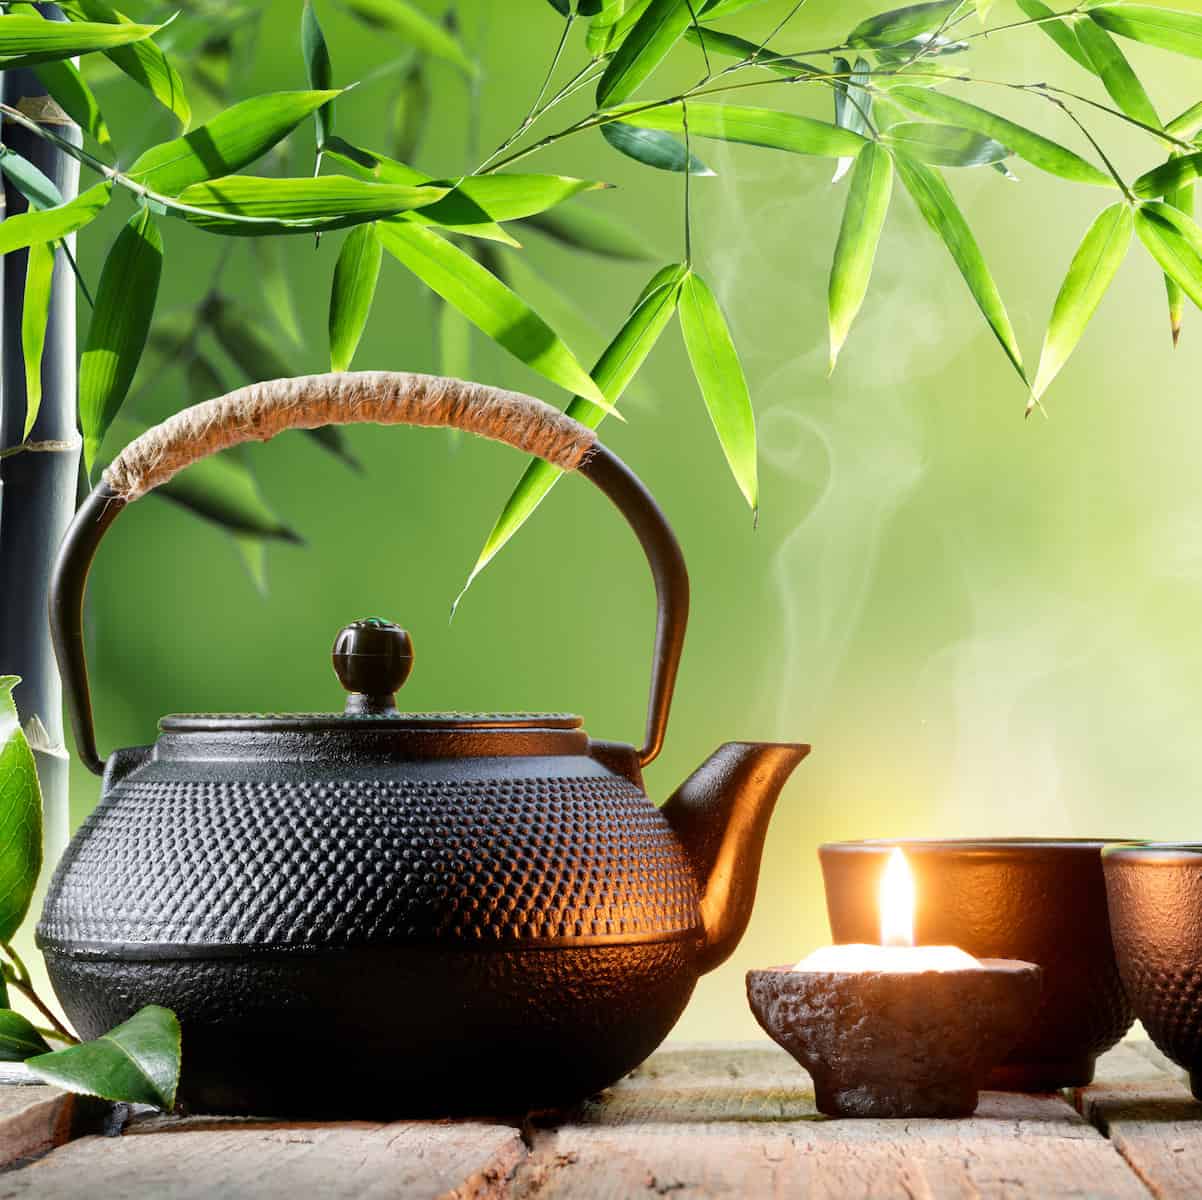 learn about tea Black iron teapot with green tea leaves